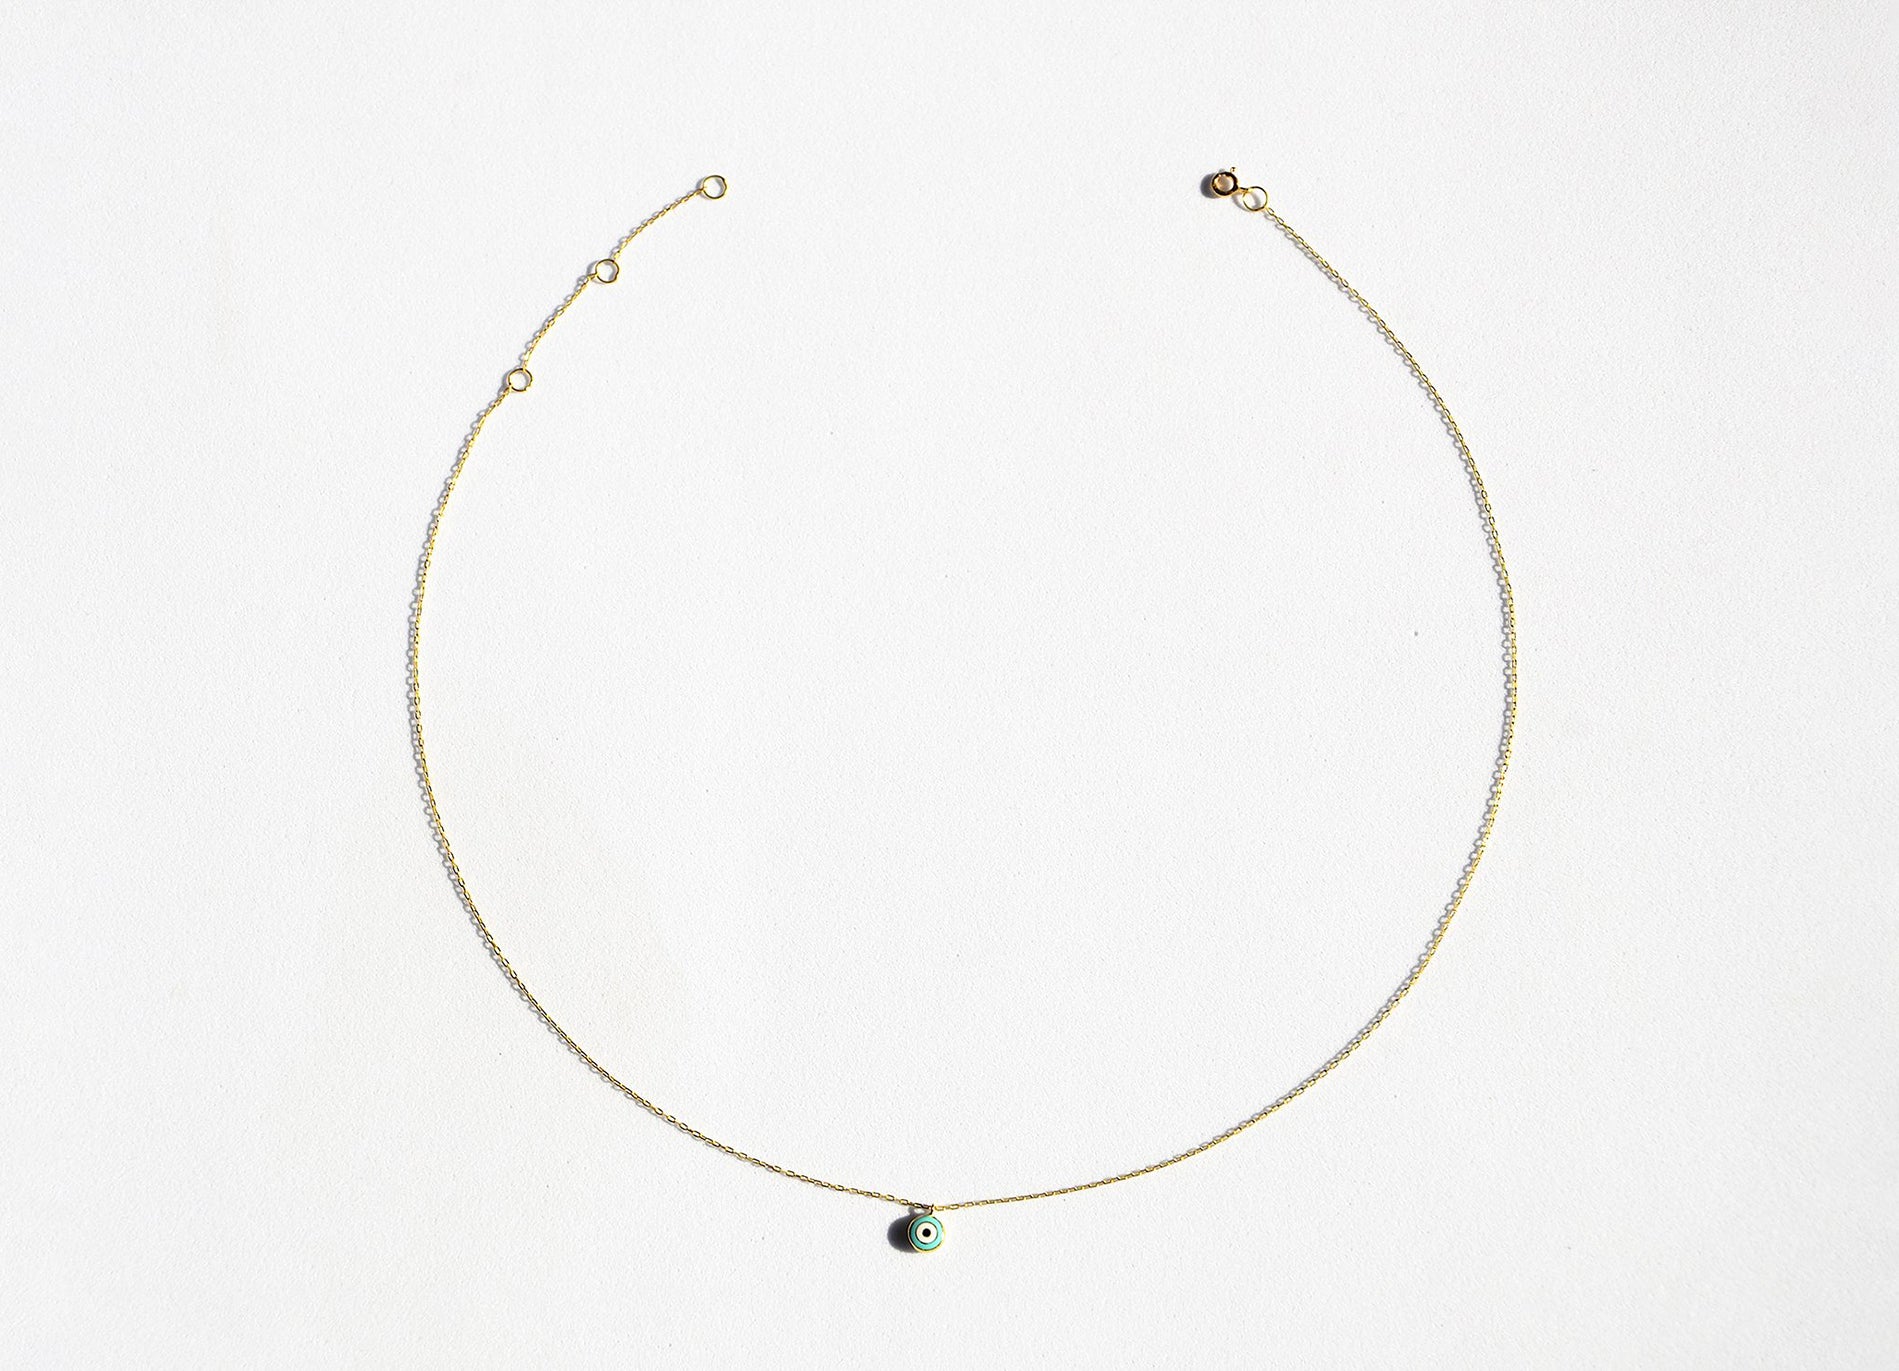 Golden filigran neckless out of 18k solid gold with small turquoise evil eye pendant - 40cm length with 4cm extensions.